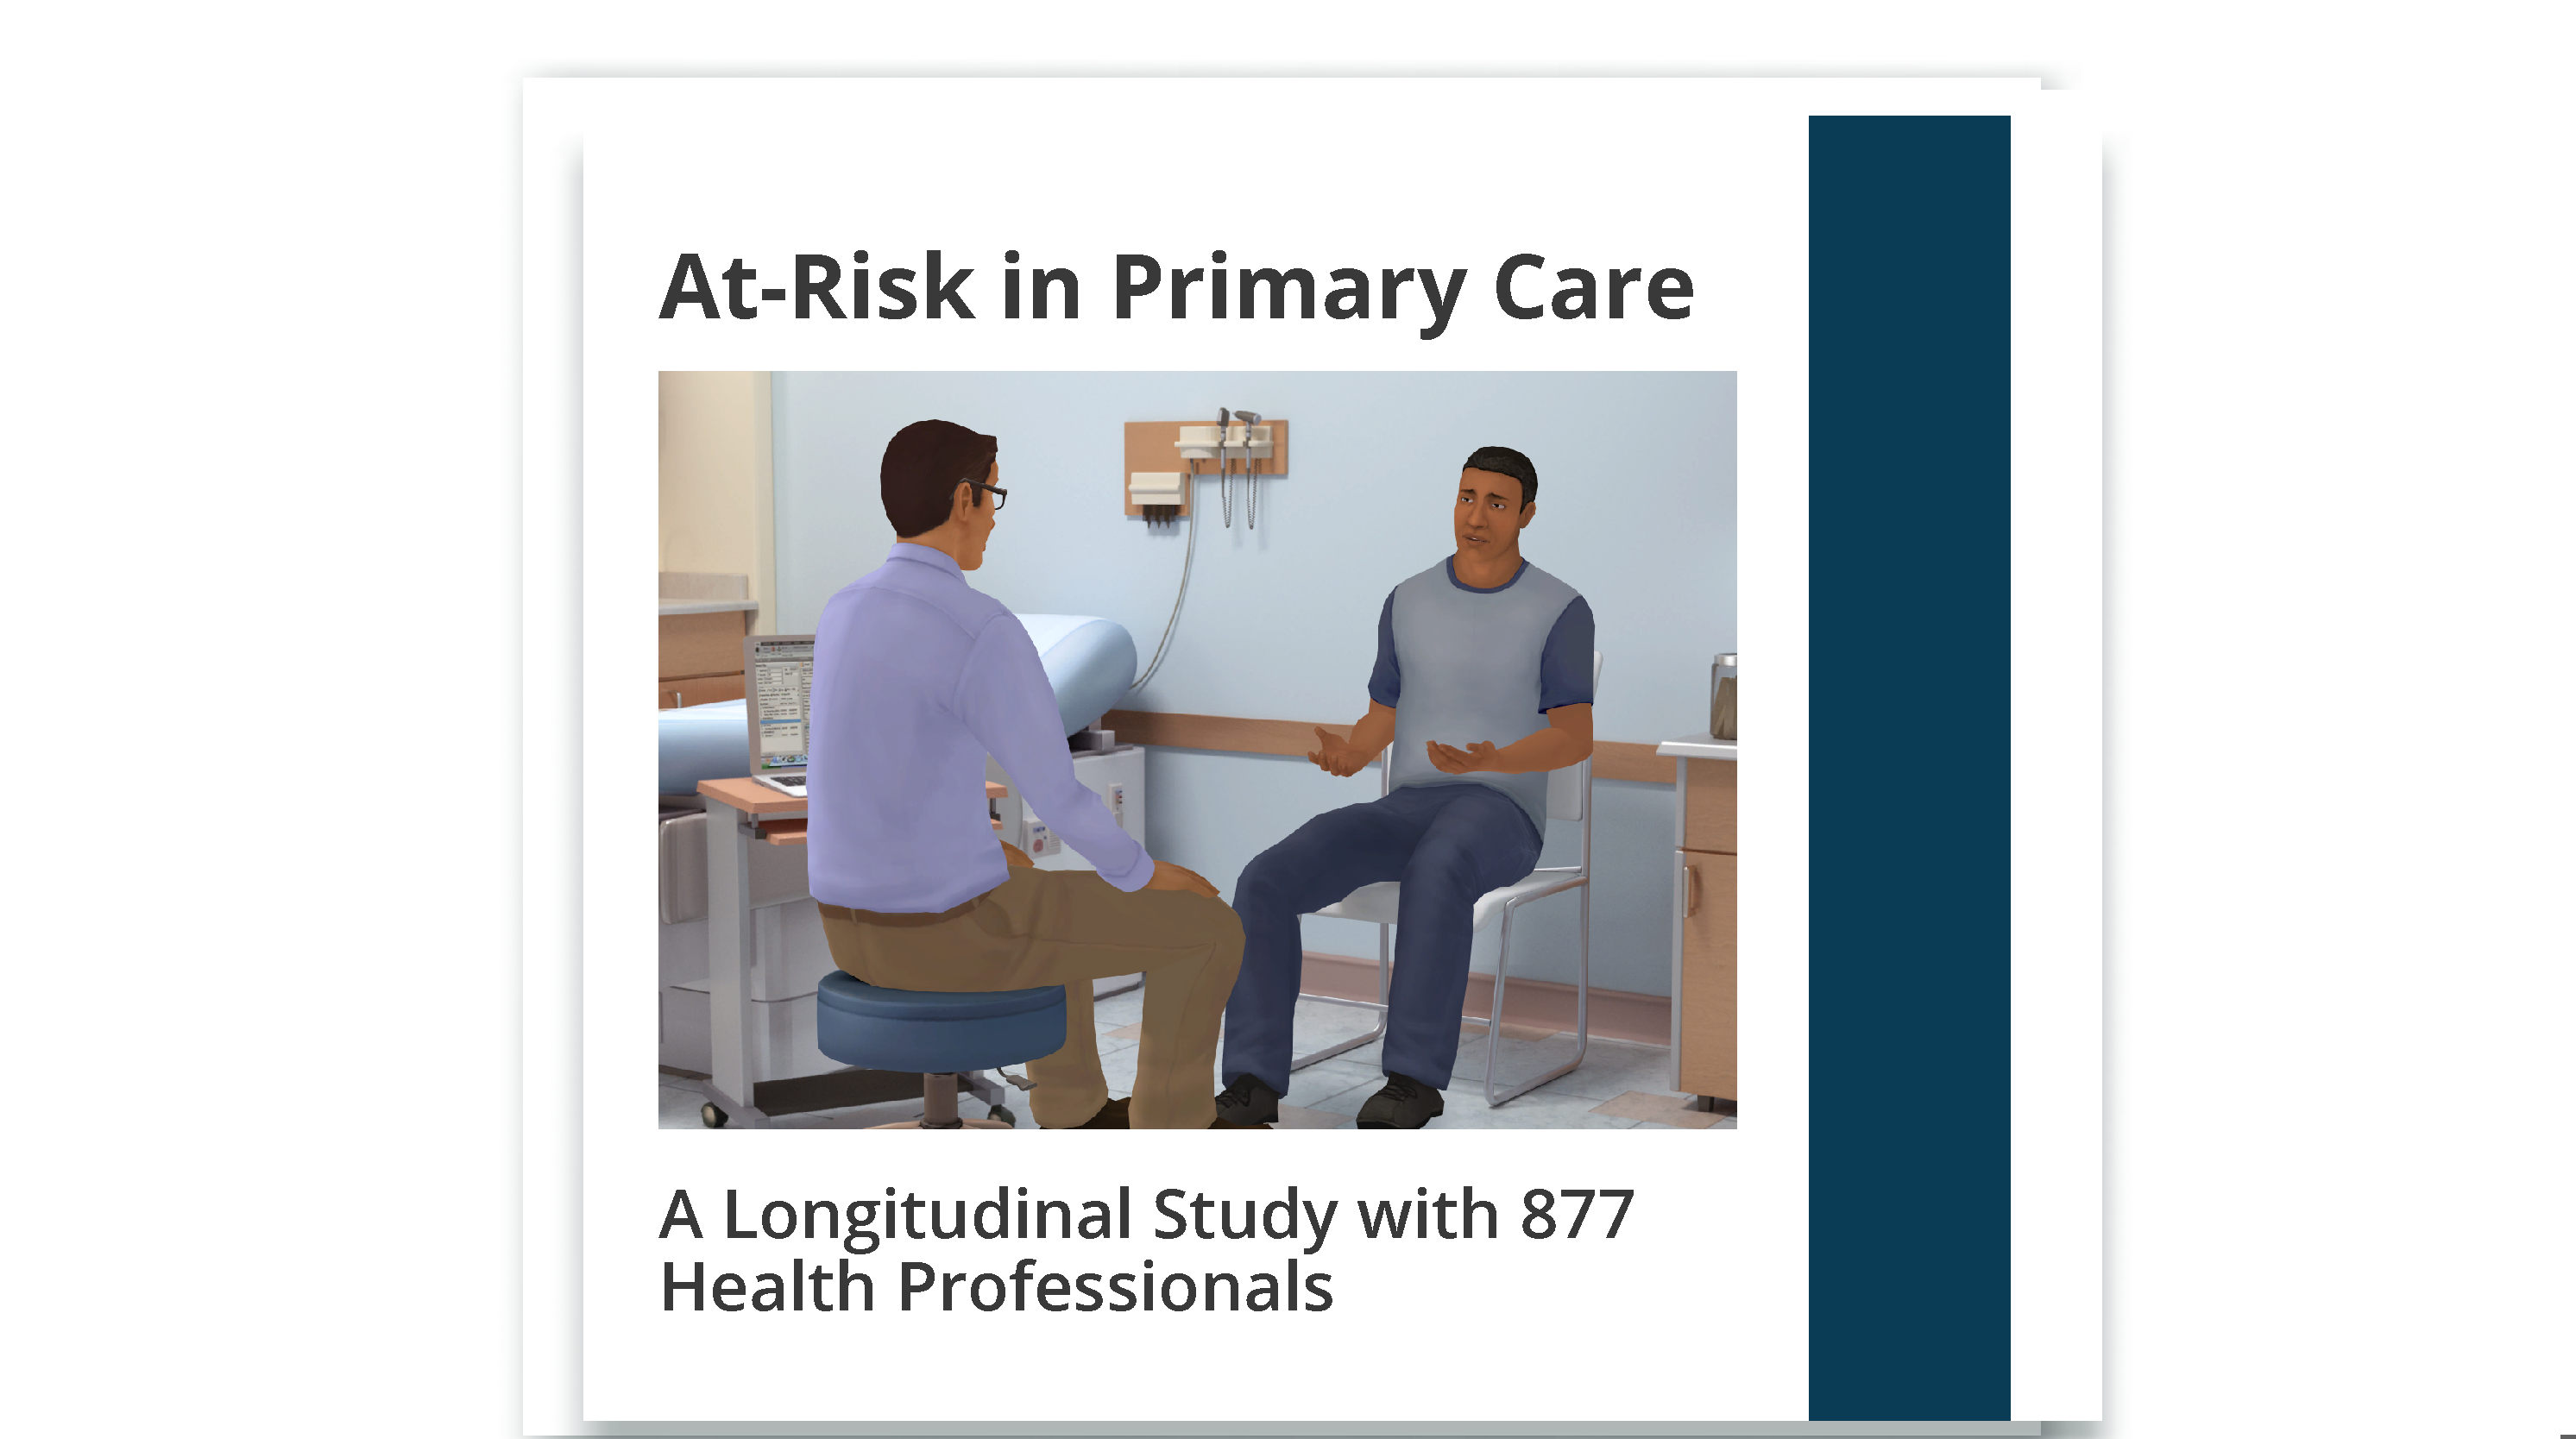 At-Risk in Primary Care